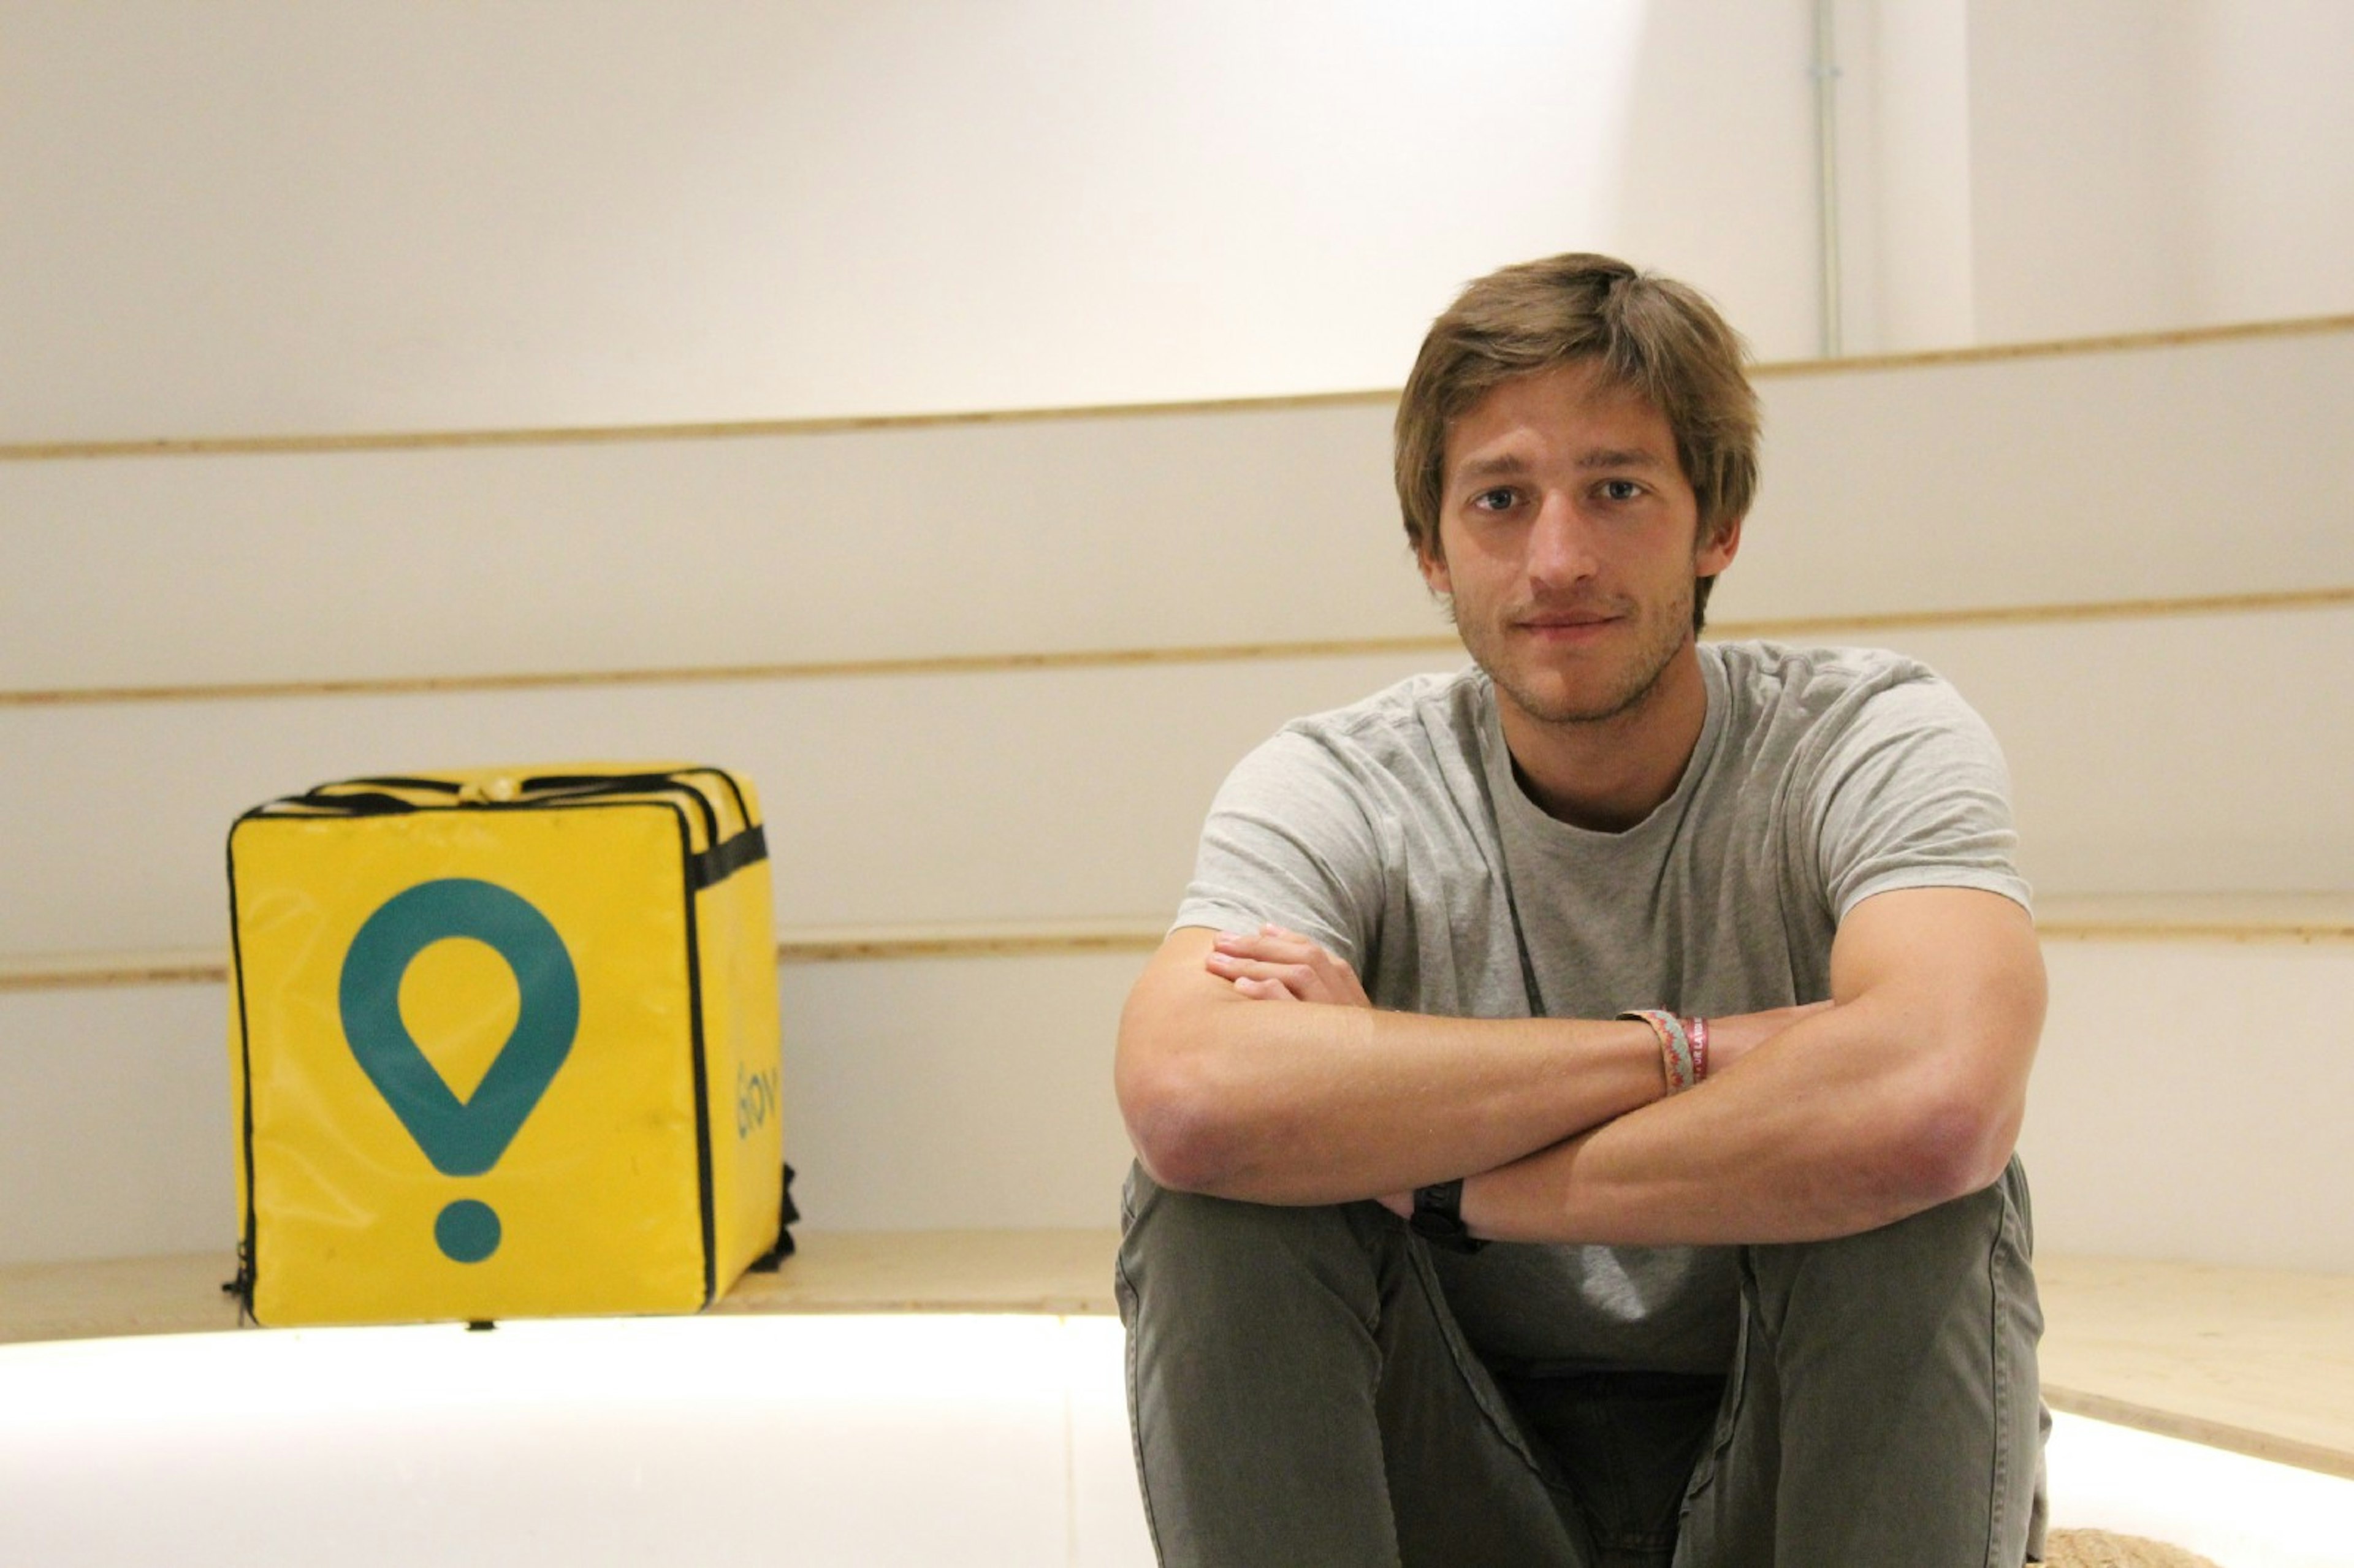 Glovo founder Óscar Pierre sitting on a set of stairs next to a Glovo delivery bag.